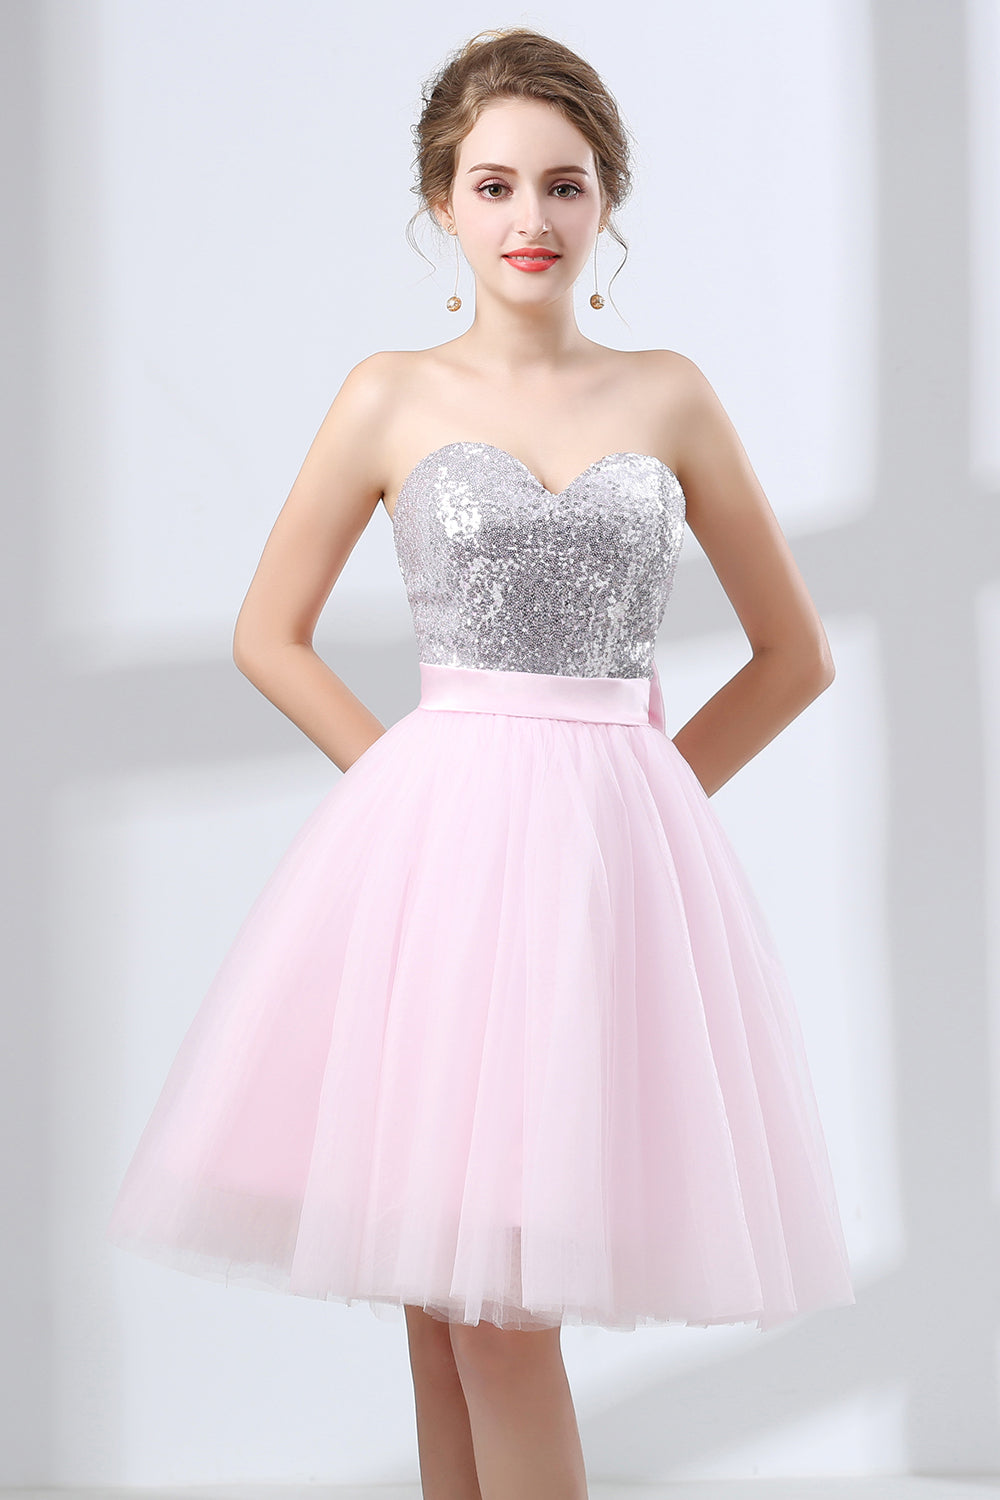 Sequin Lace & Tulle Sweetheart Neckline Short Length A-line Corset Bridesmaid Dresses outfit, Evening Dress Fitted